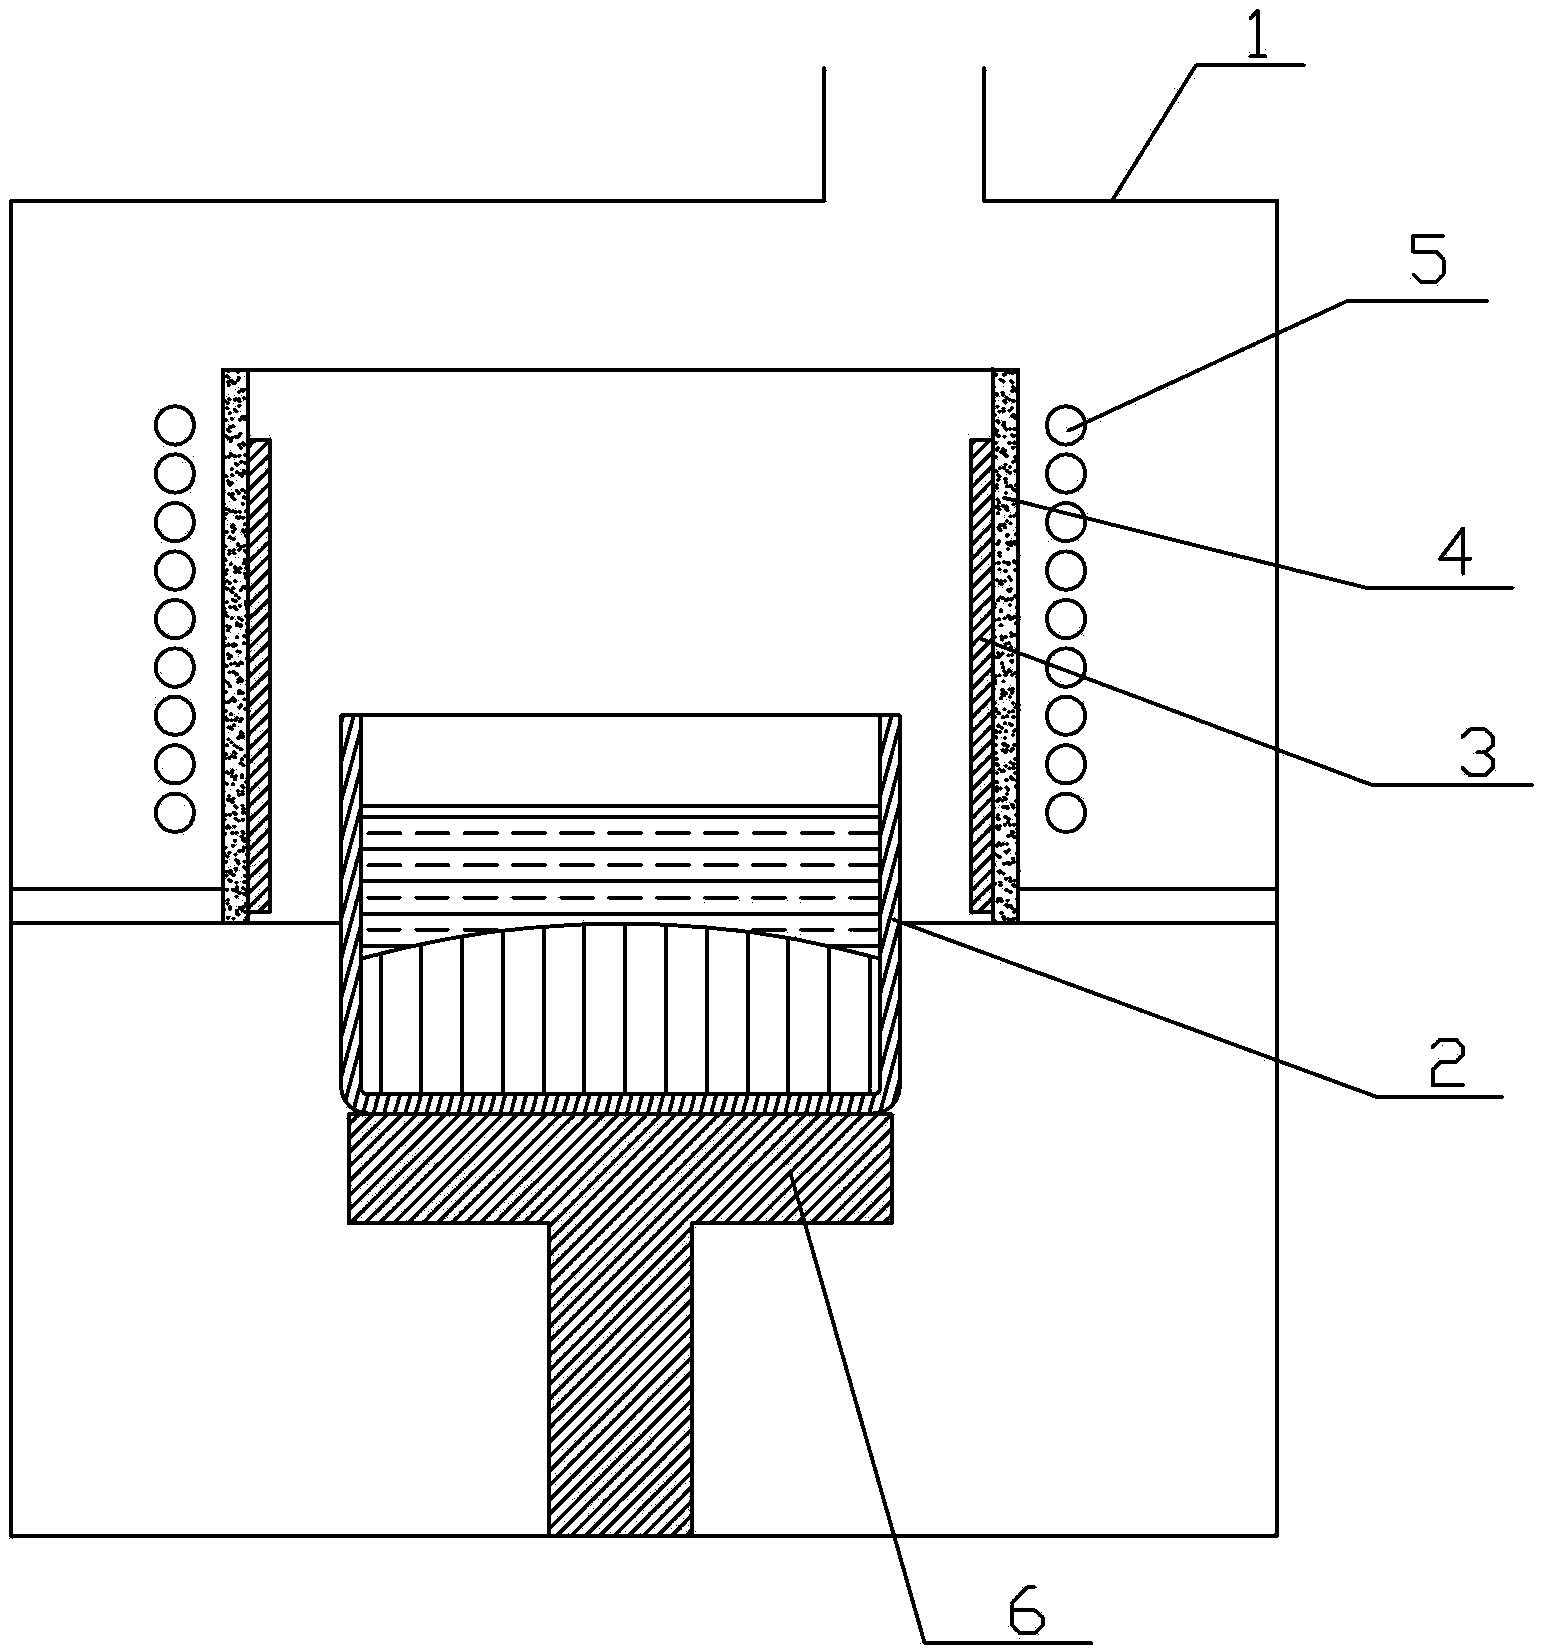 Polysilicon directional solidification device